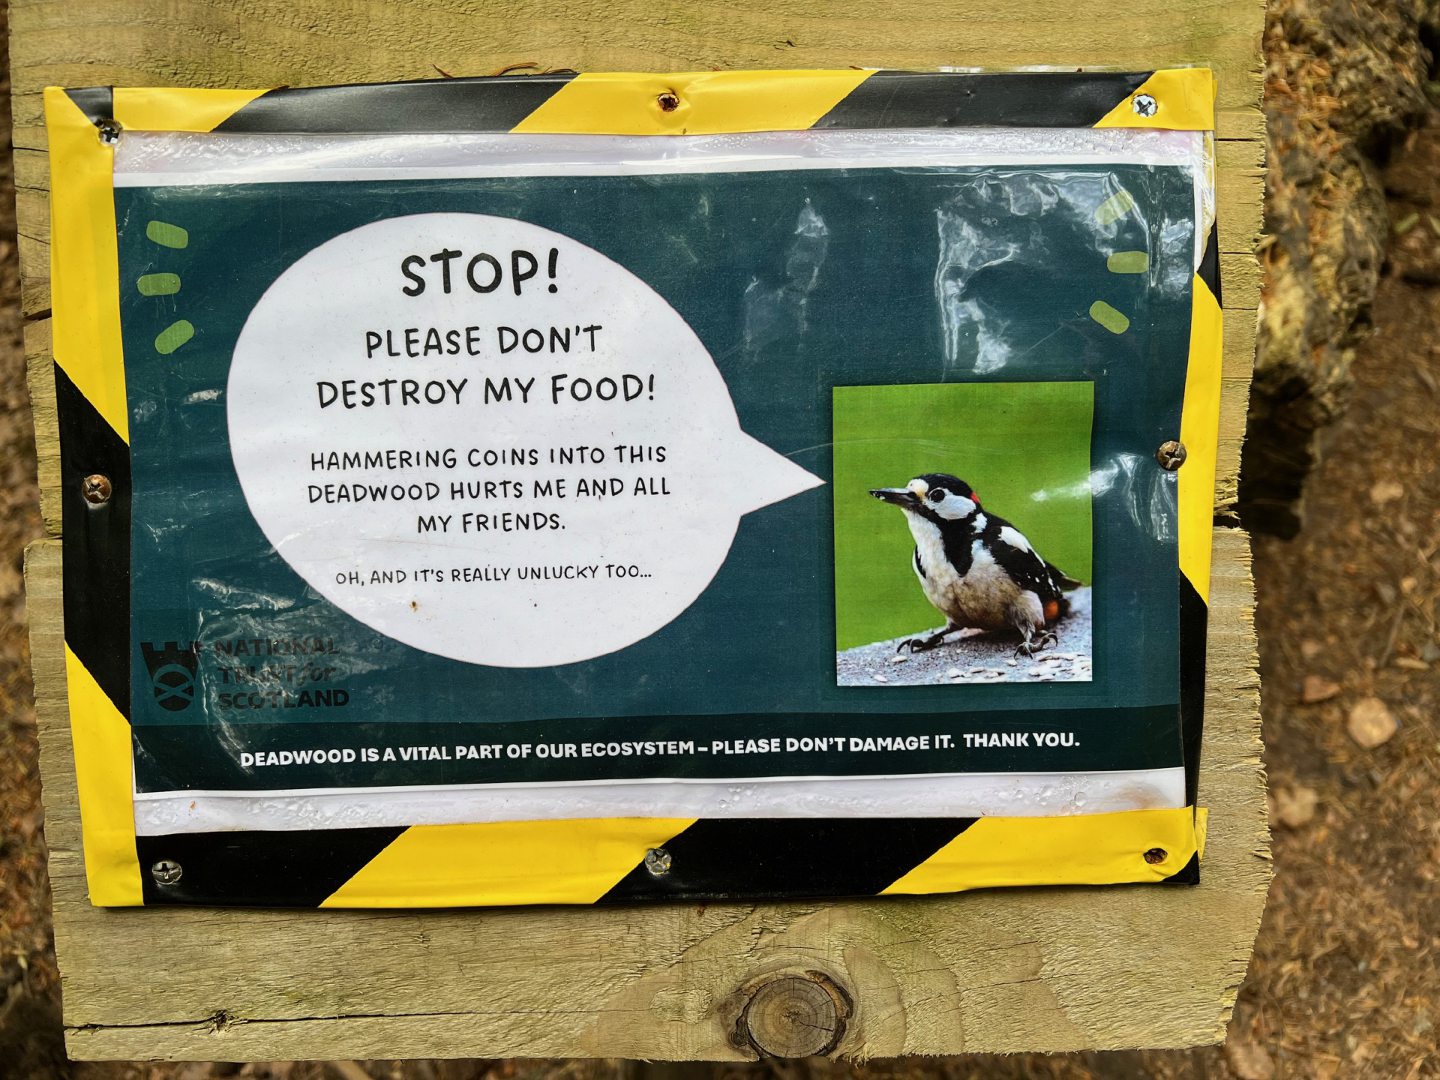 A sign featuring a woodpecker urging people not to hammer coins into trees.